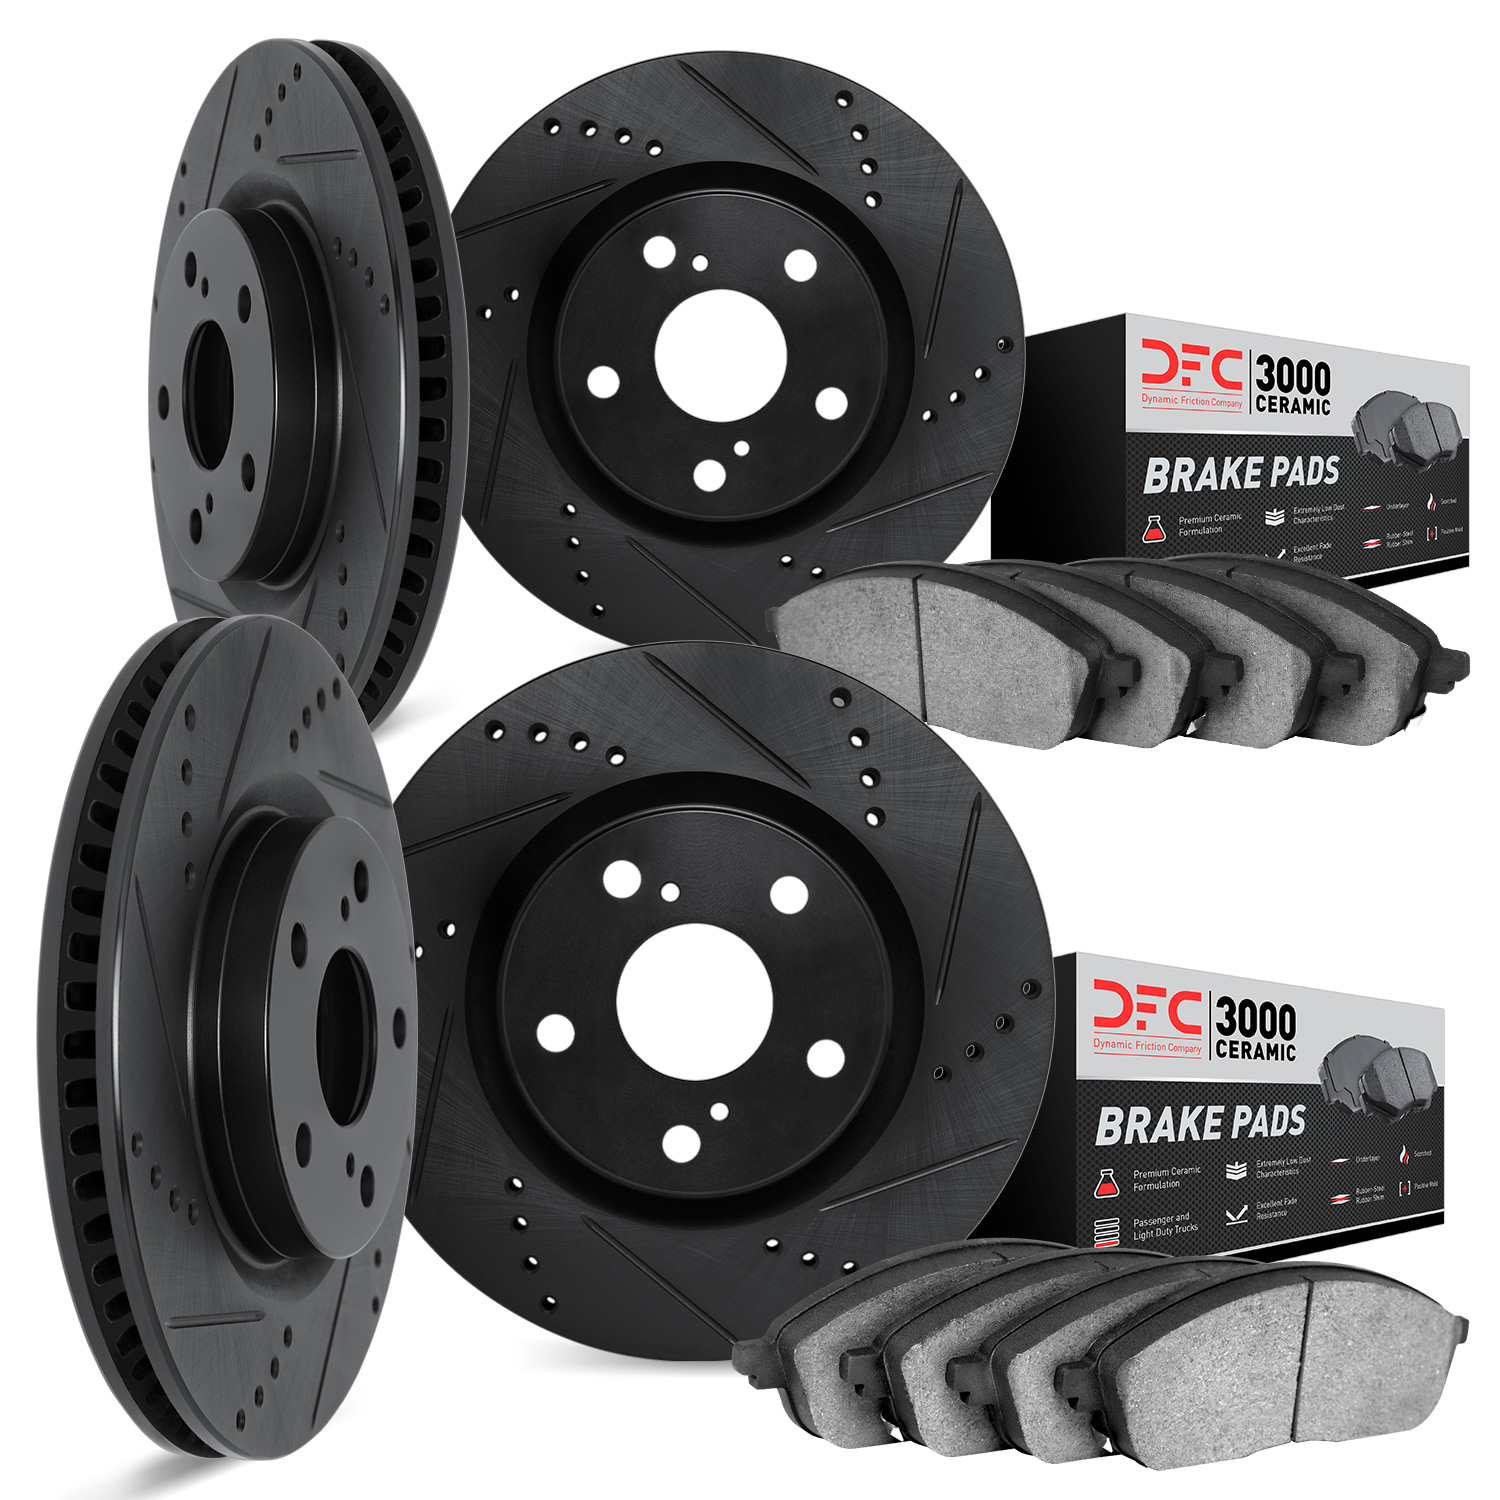 8304-31033 Drilled/Slotted Brake Rotors with 3000-Series Ceramic Brake Pads Kit [Black], 1999-2006 BMW, Position: Front and Rear